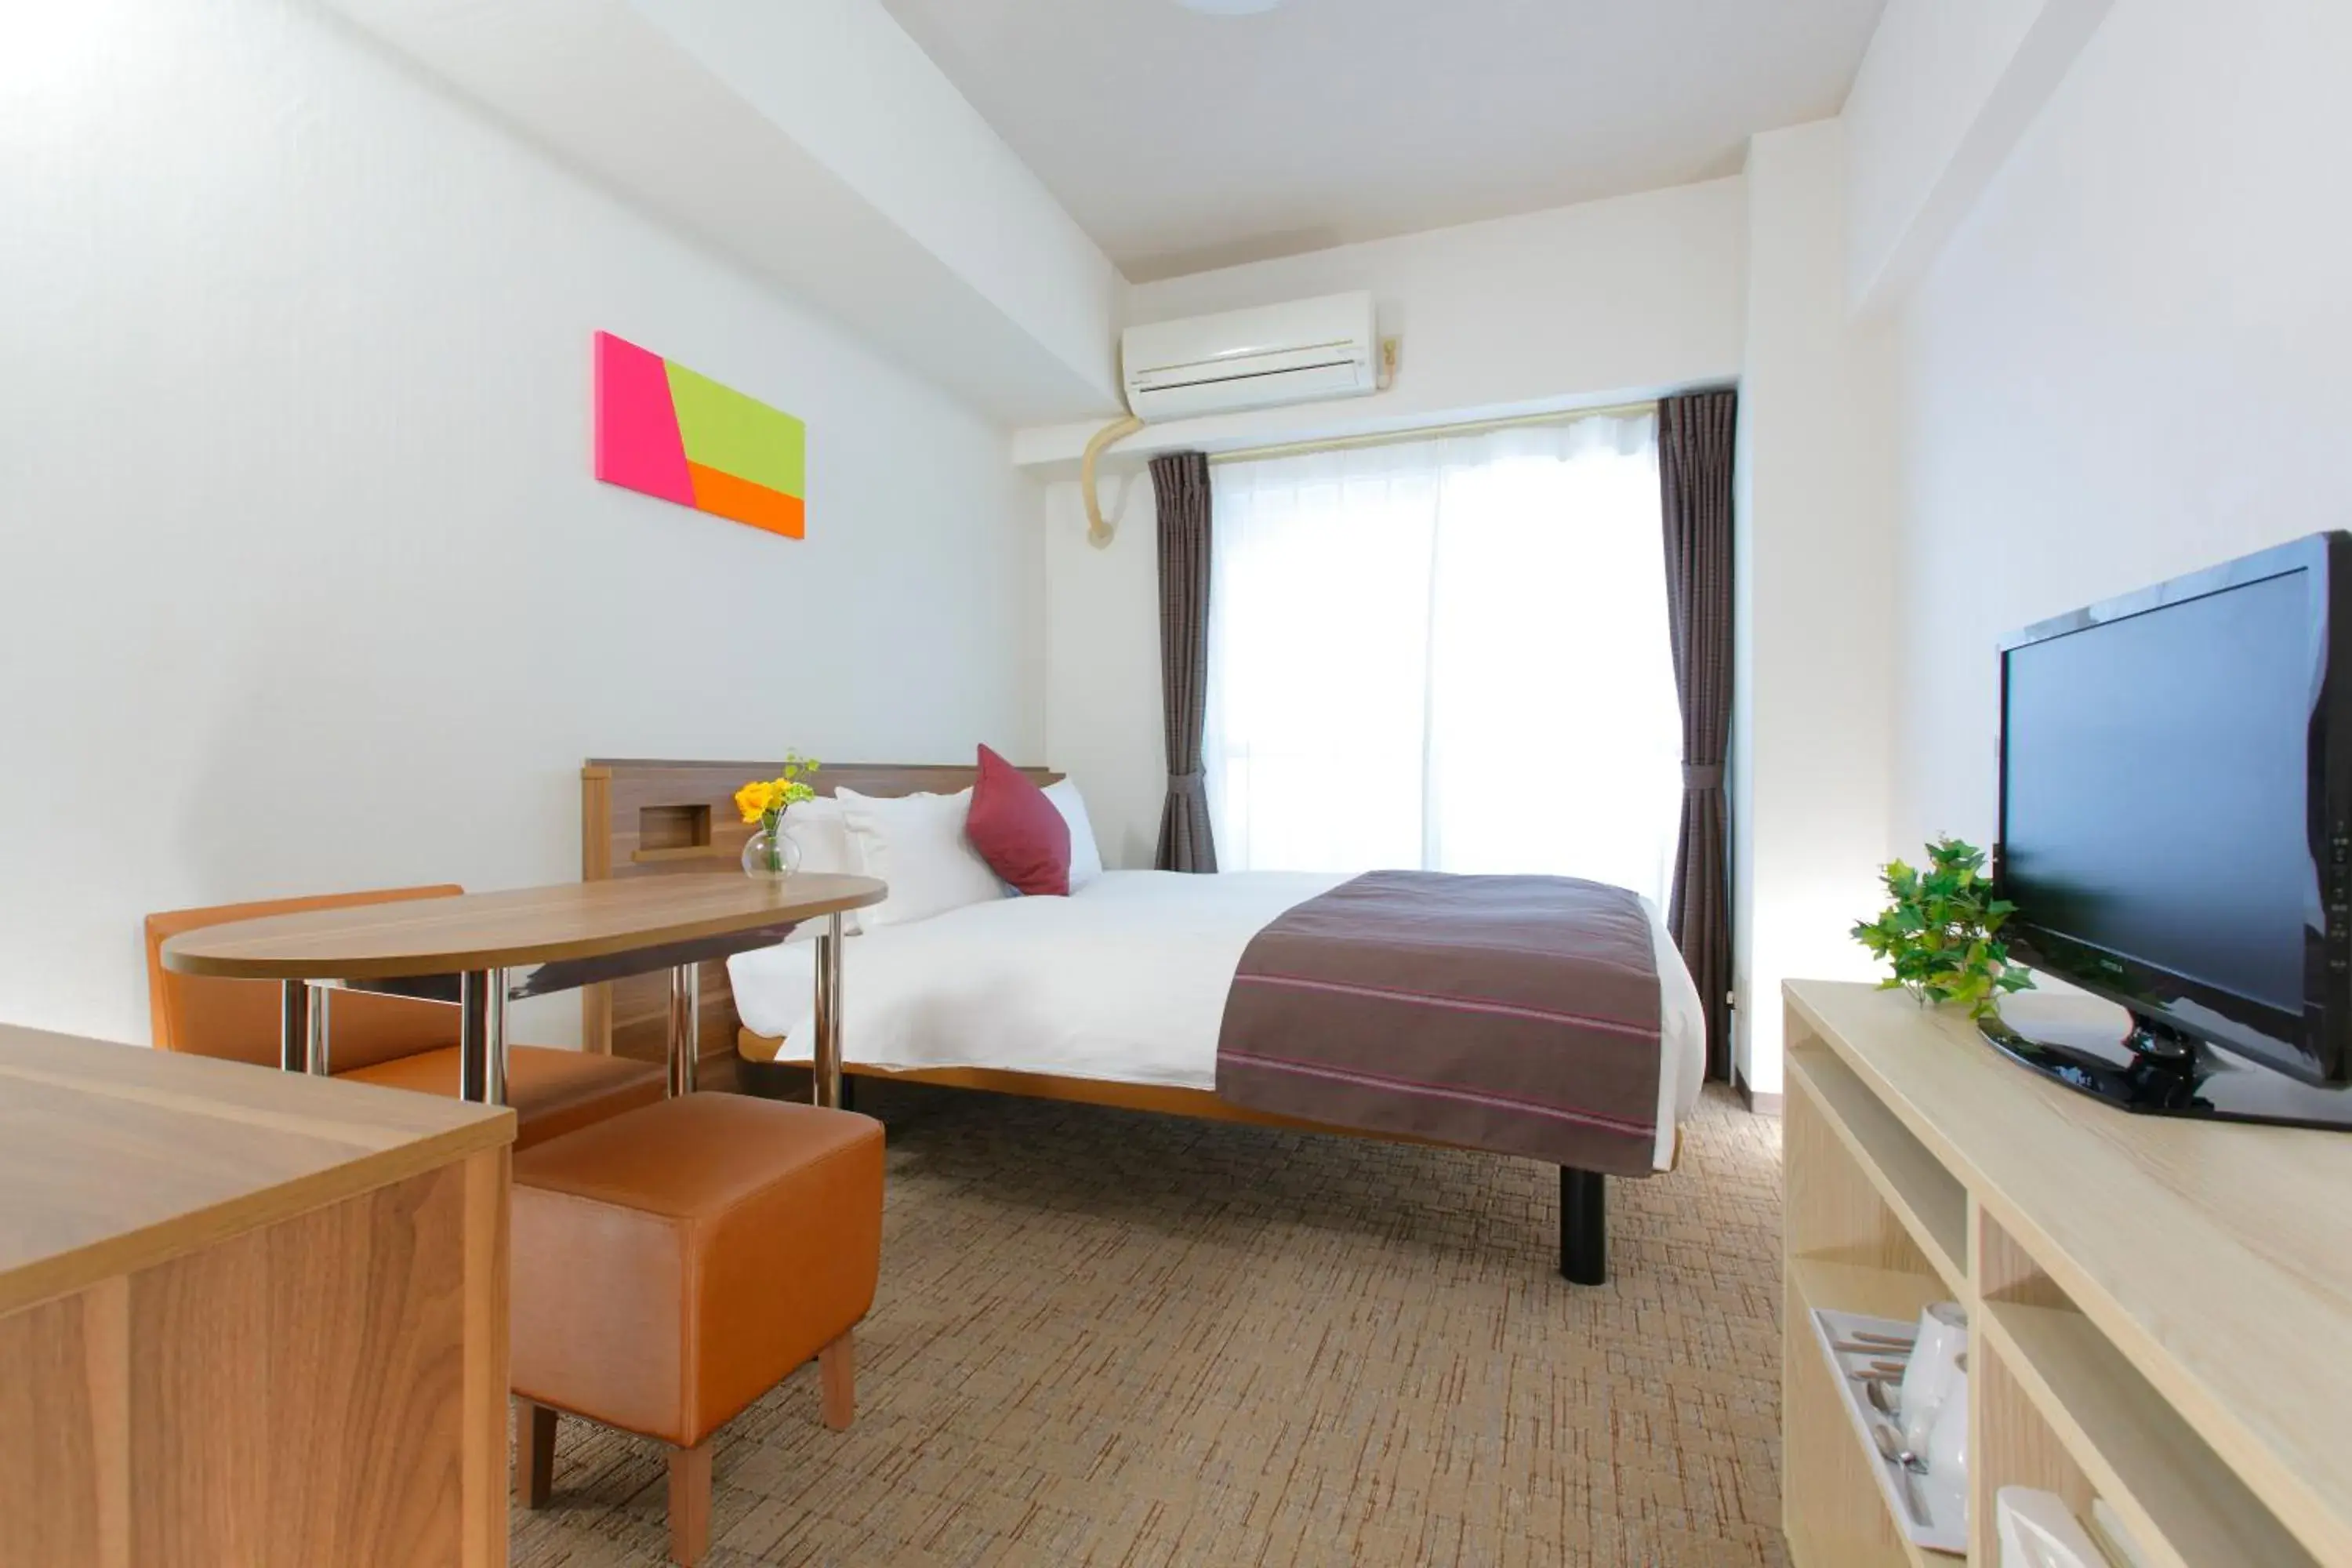 Standard Double Room - House Keeping is Optional with Additional Cost - Non-Smoking in Hotel Mystays Ueno-Iriyaguchi